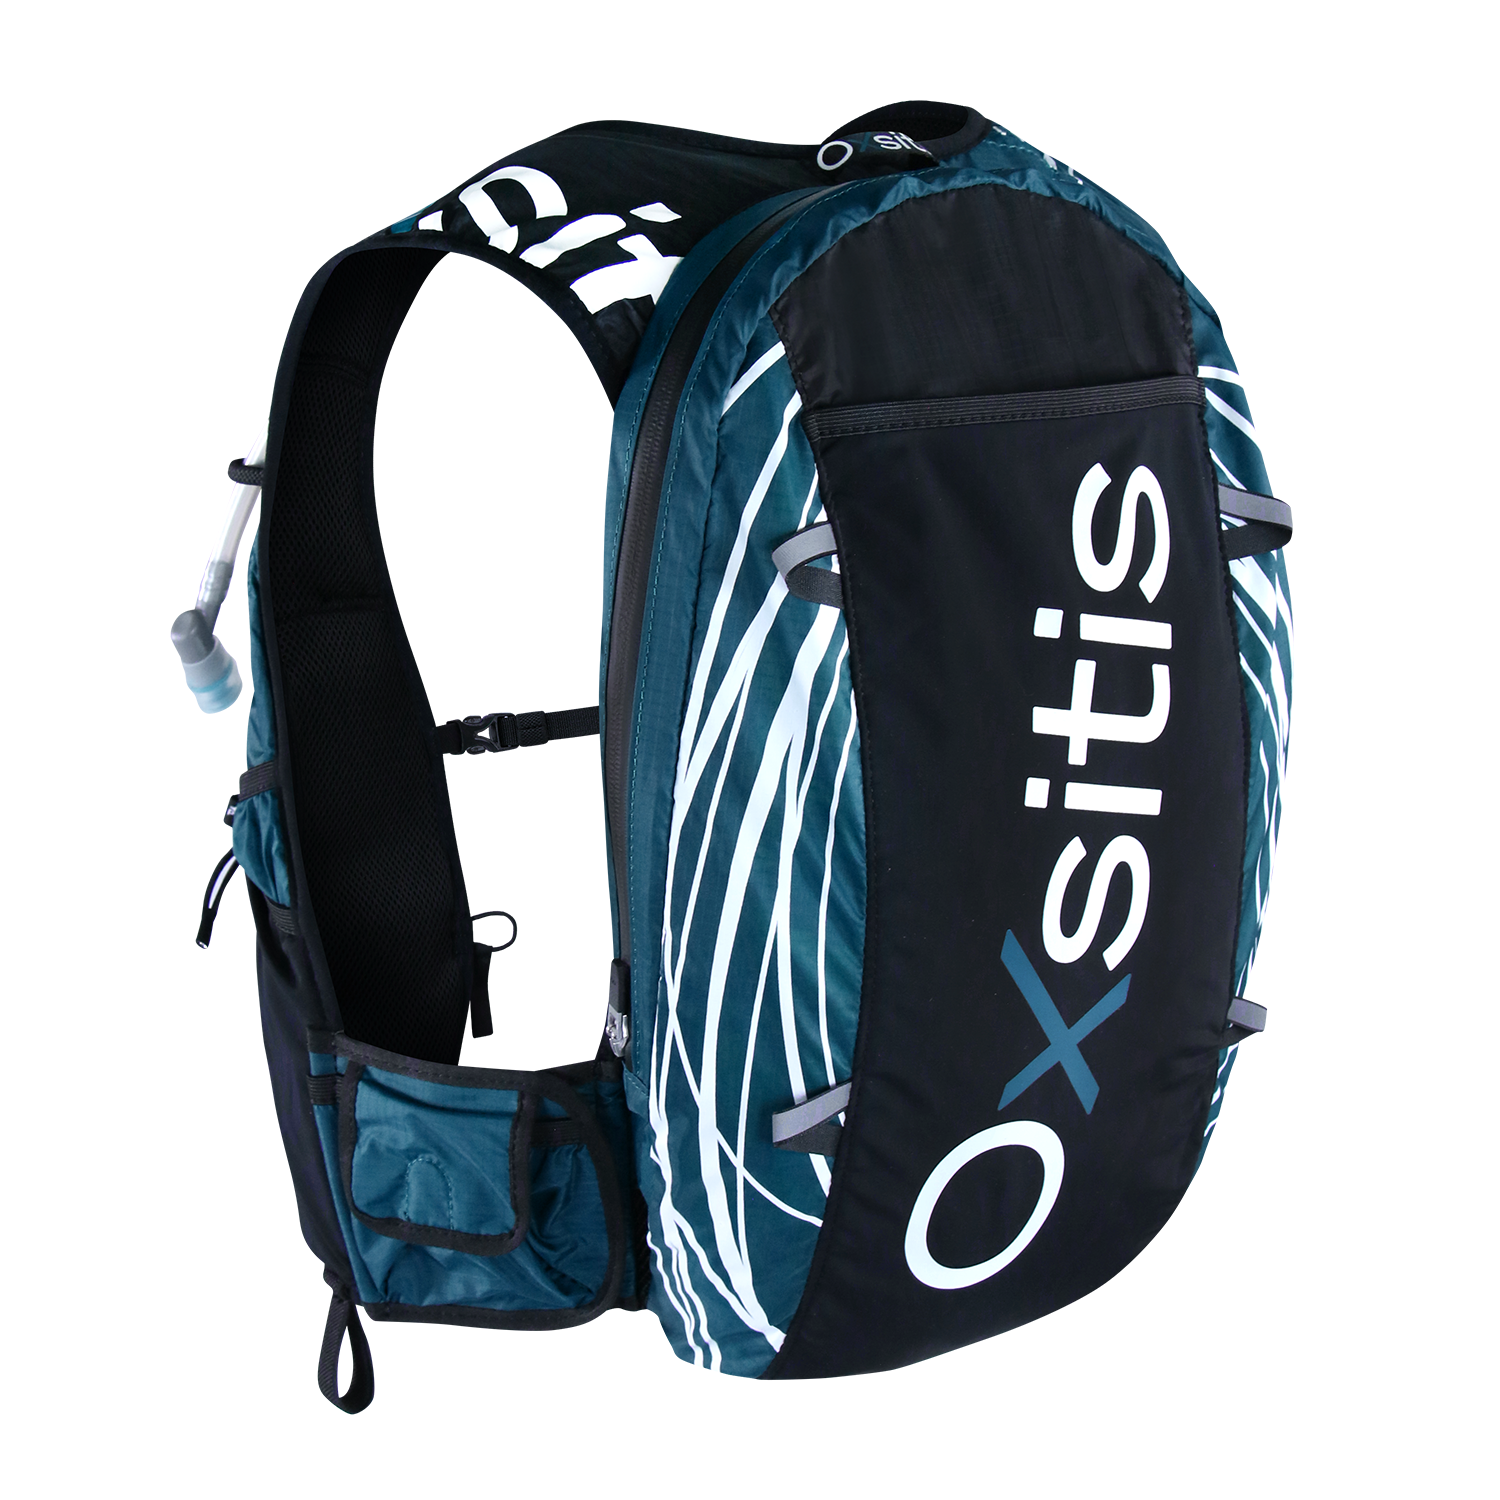 Oxsitis Ace 16 - Trail running backpack